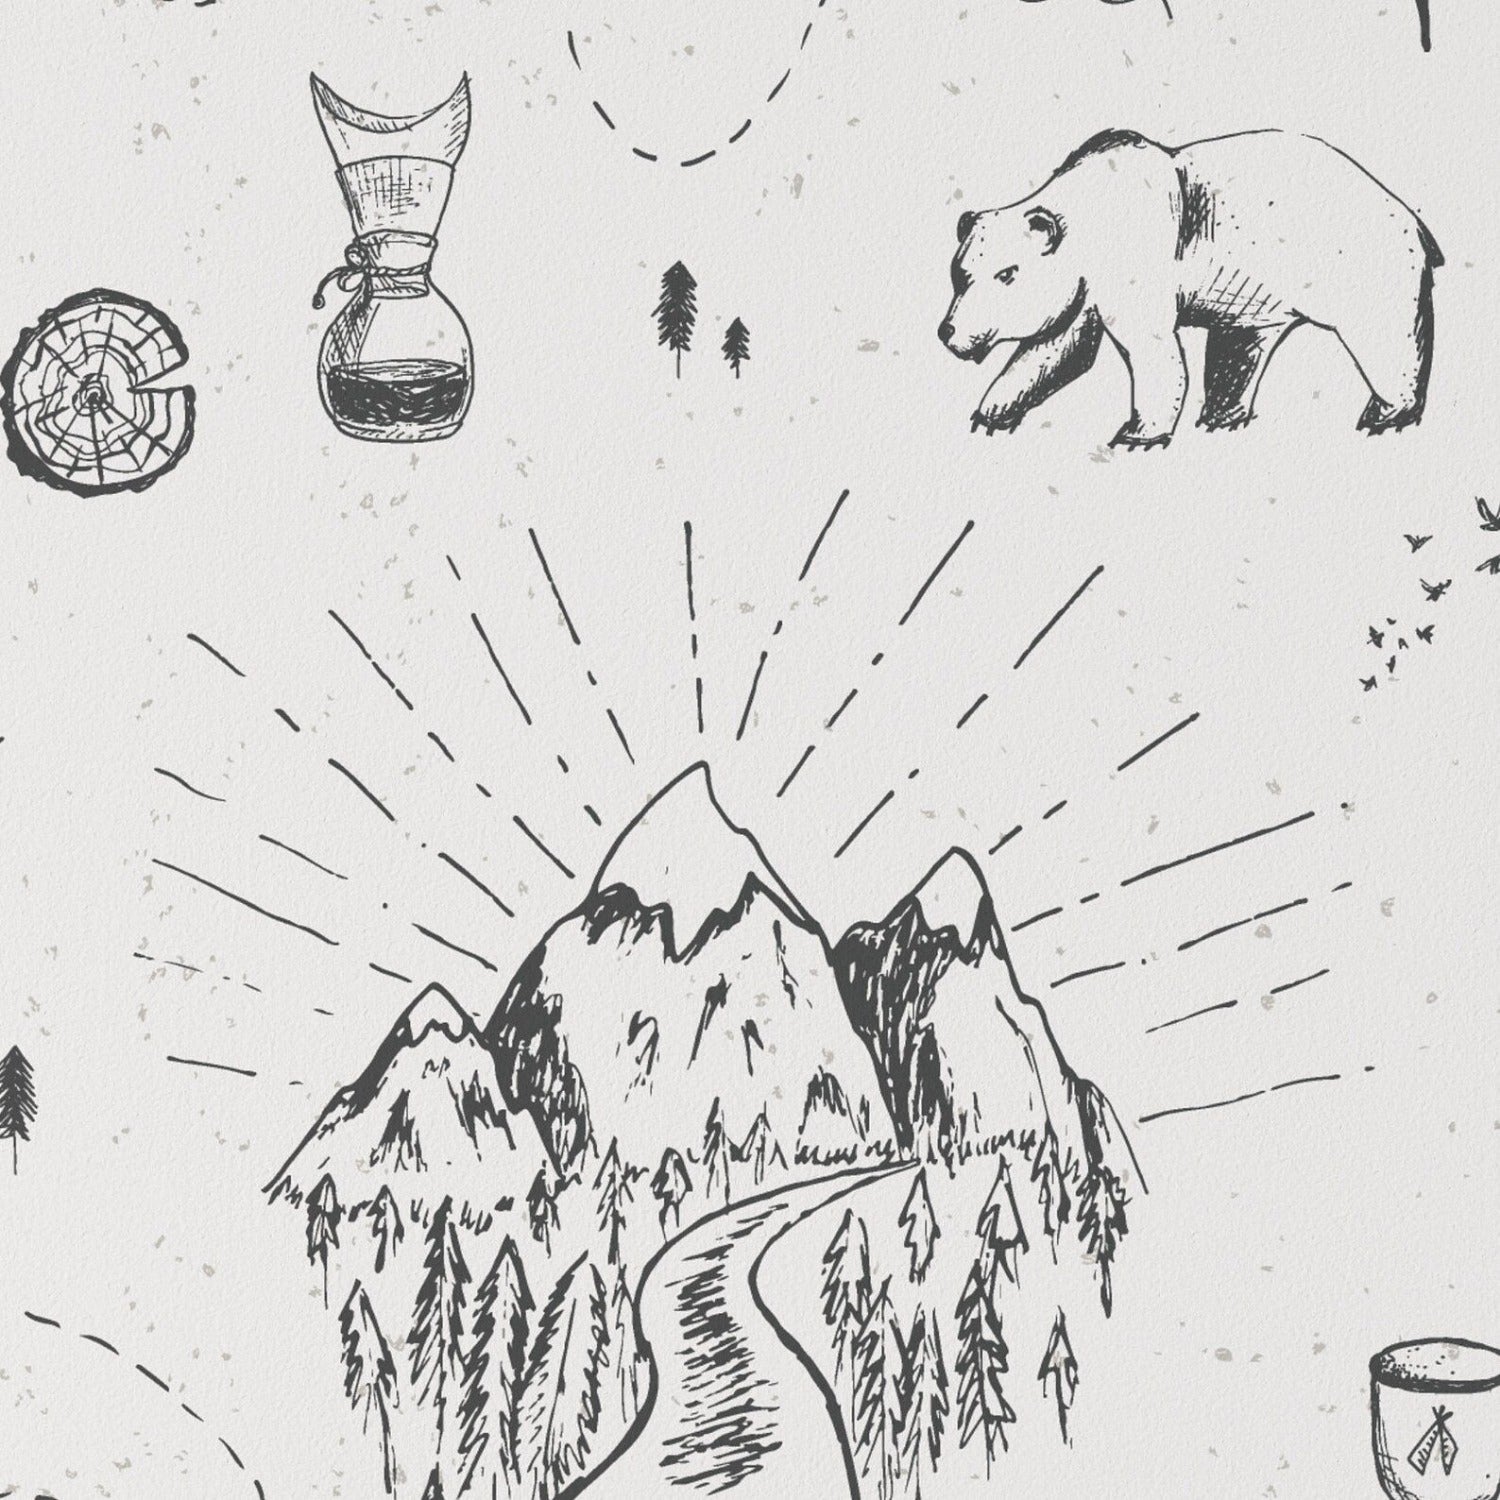 A detailed close-up of the Big Adventure Kids Wallpaper showcasing hand-drawn illustrations of a bear, mountains, and outdoor elements in black ink on a white background, evoking the spirit of exploration and nature.